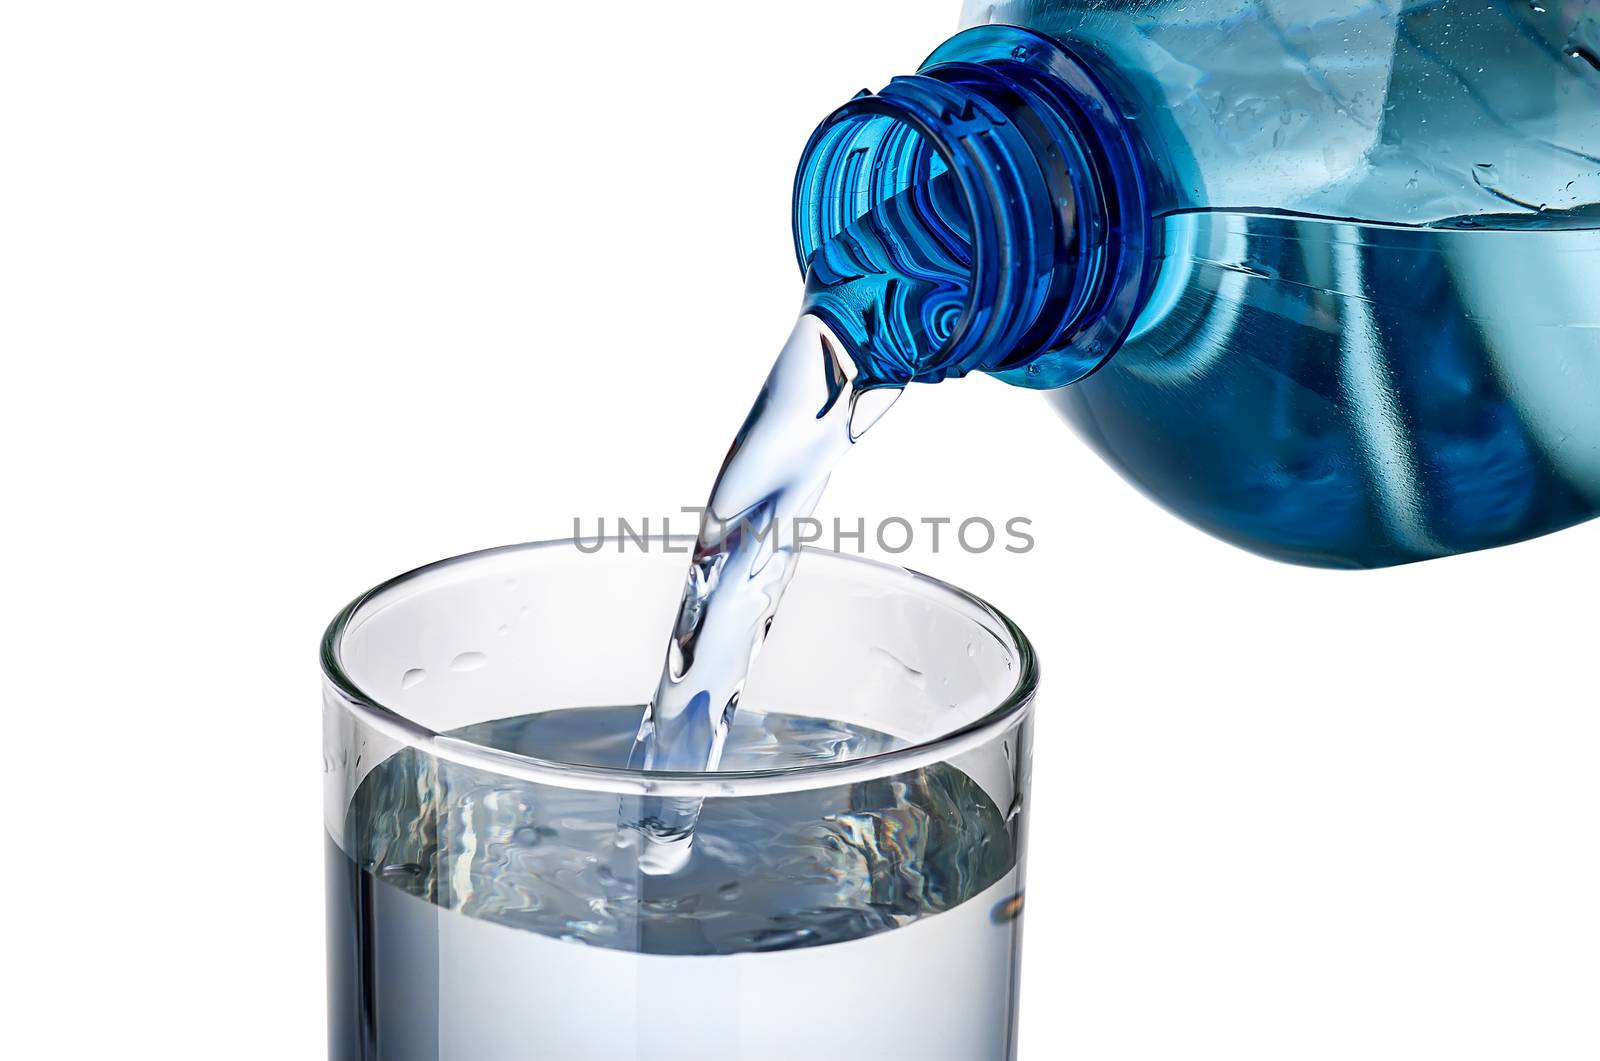 Water pouring into a glass. Glass cup and plastic bottle. Isolated on white background.